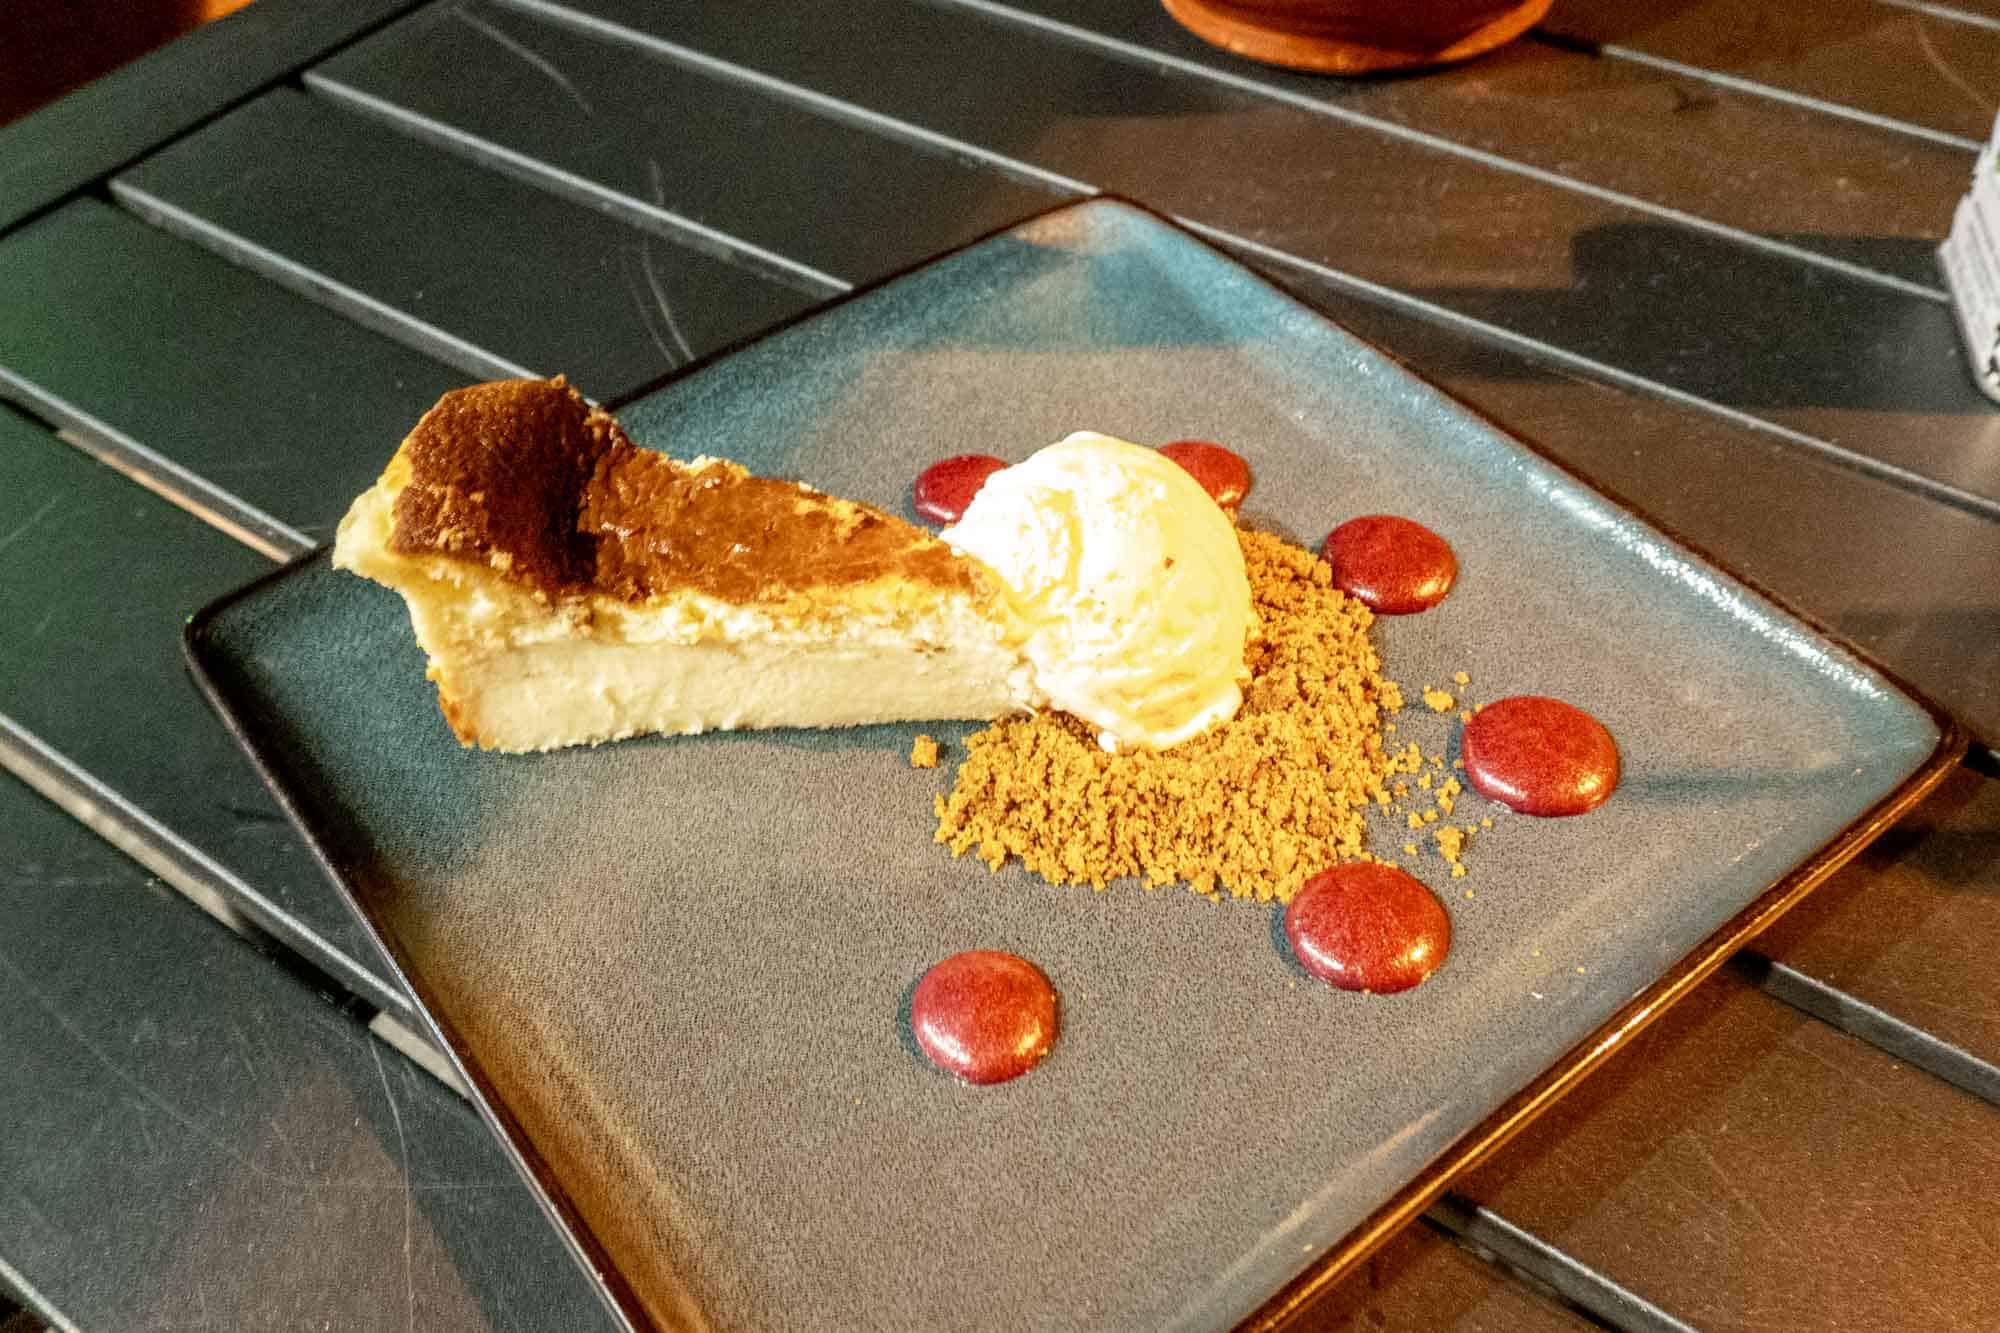 Cheesecake on plate